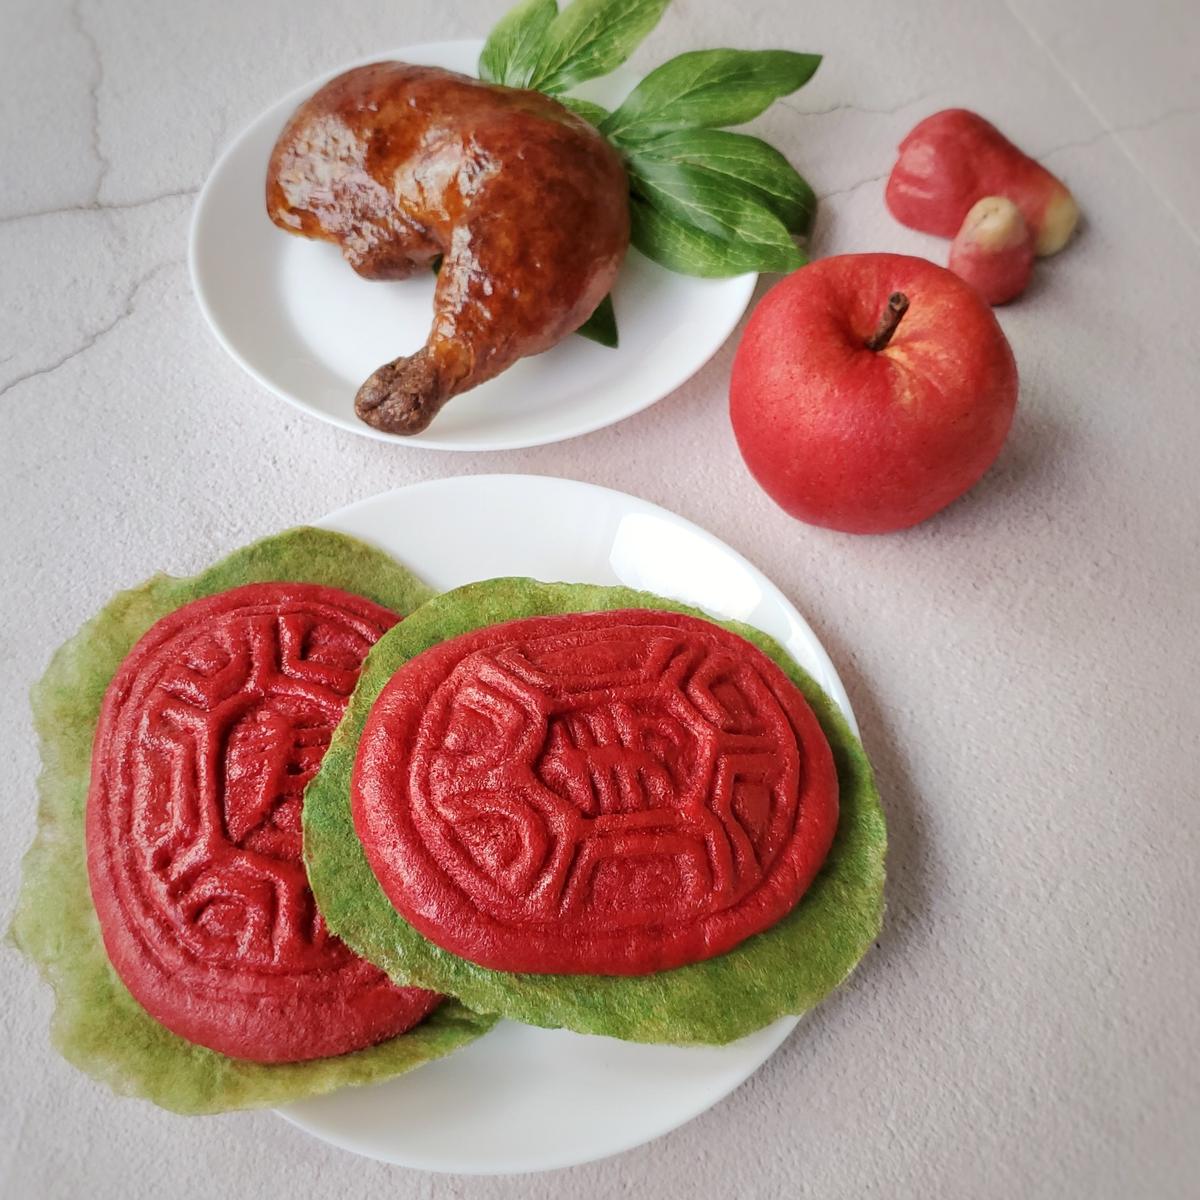 Ang ku kueh, or red tortoise cake, is a Chinese pastry made from glutinous rice flour. (Courtesy of Lei Hsiao-Chen)